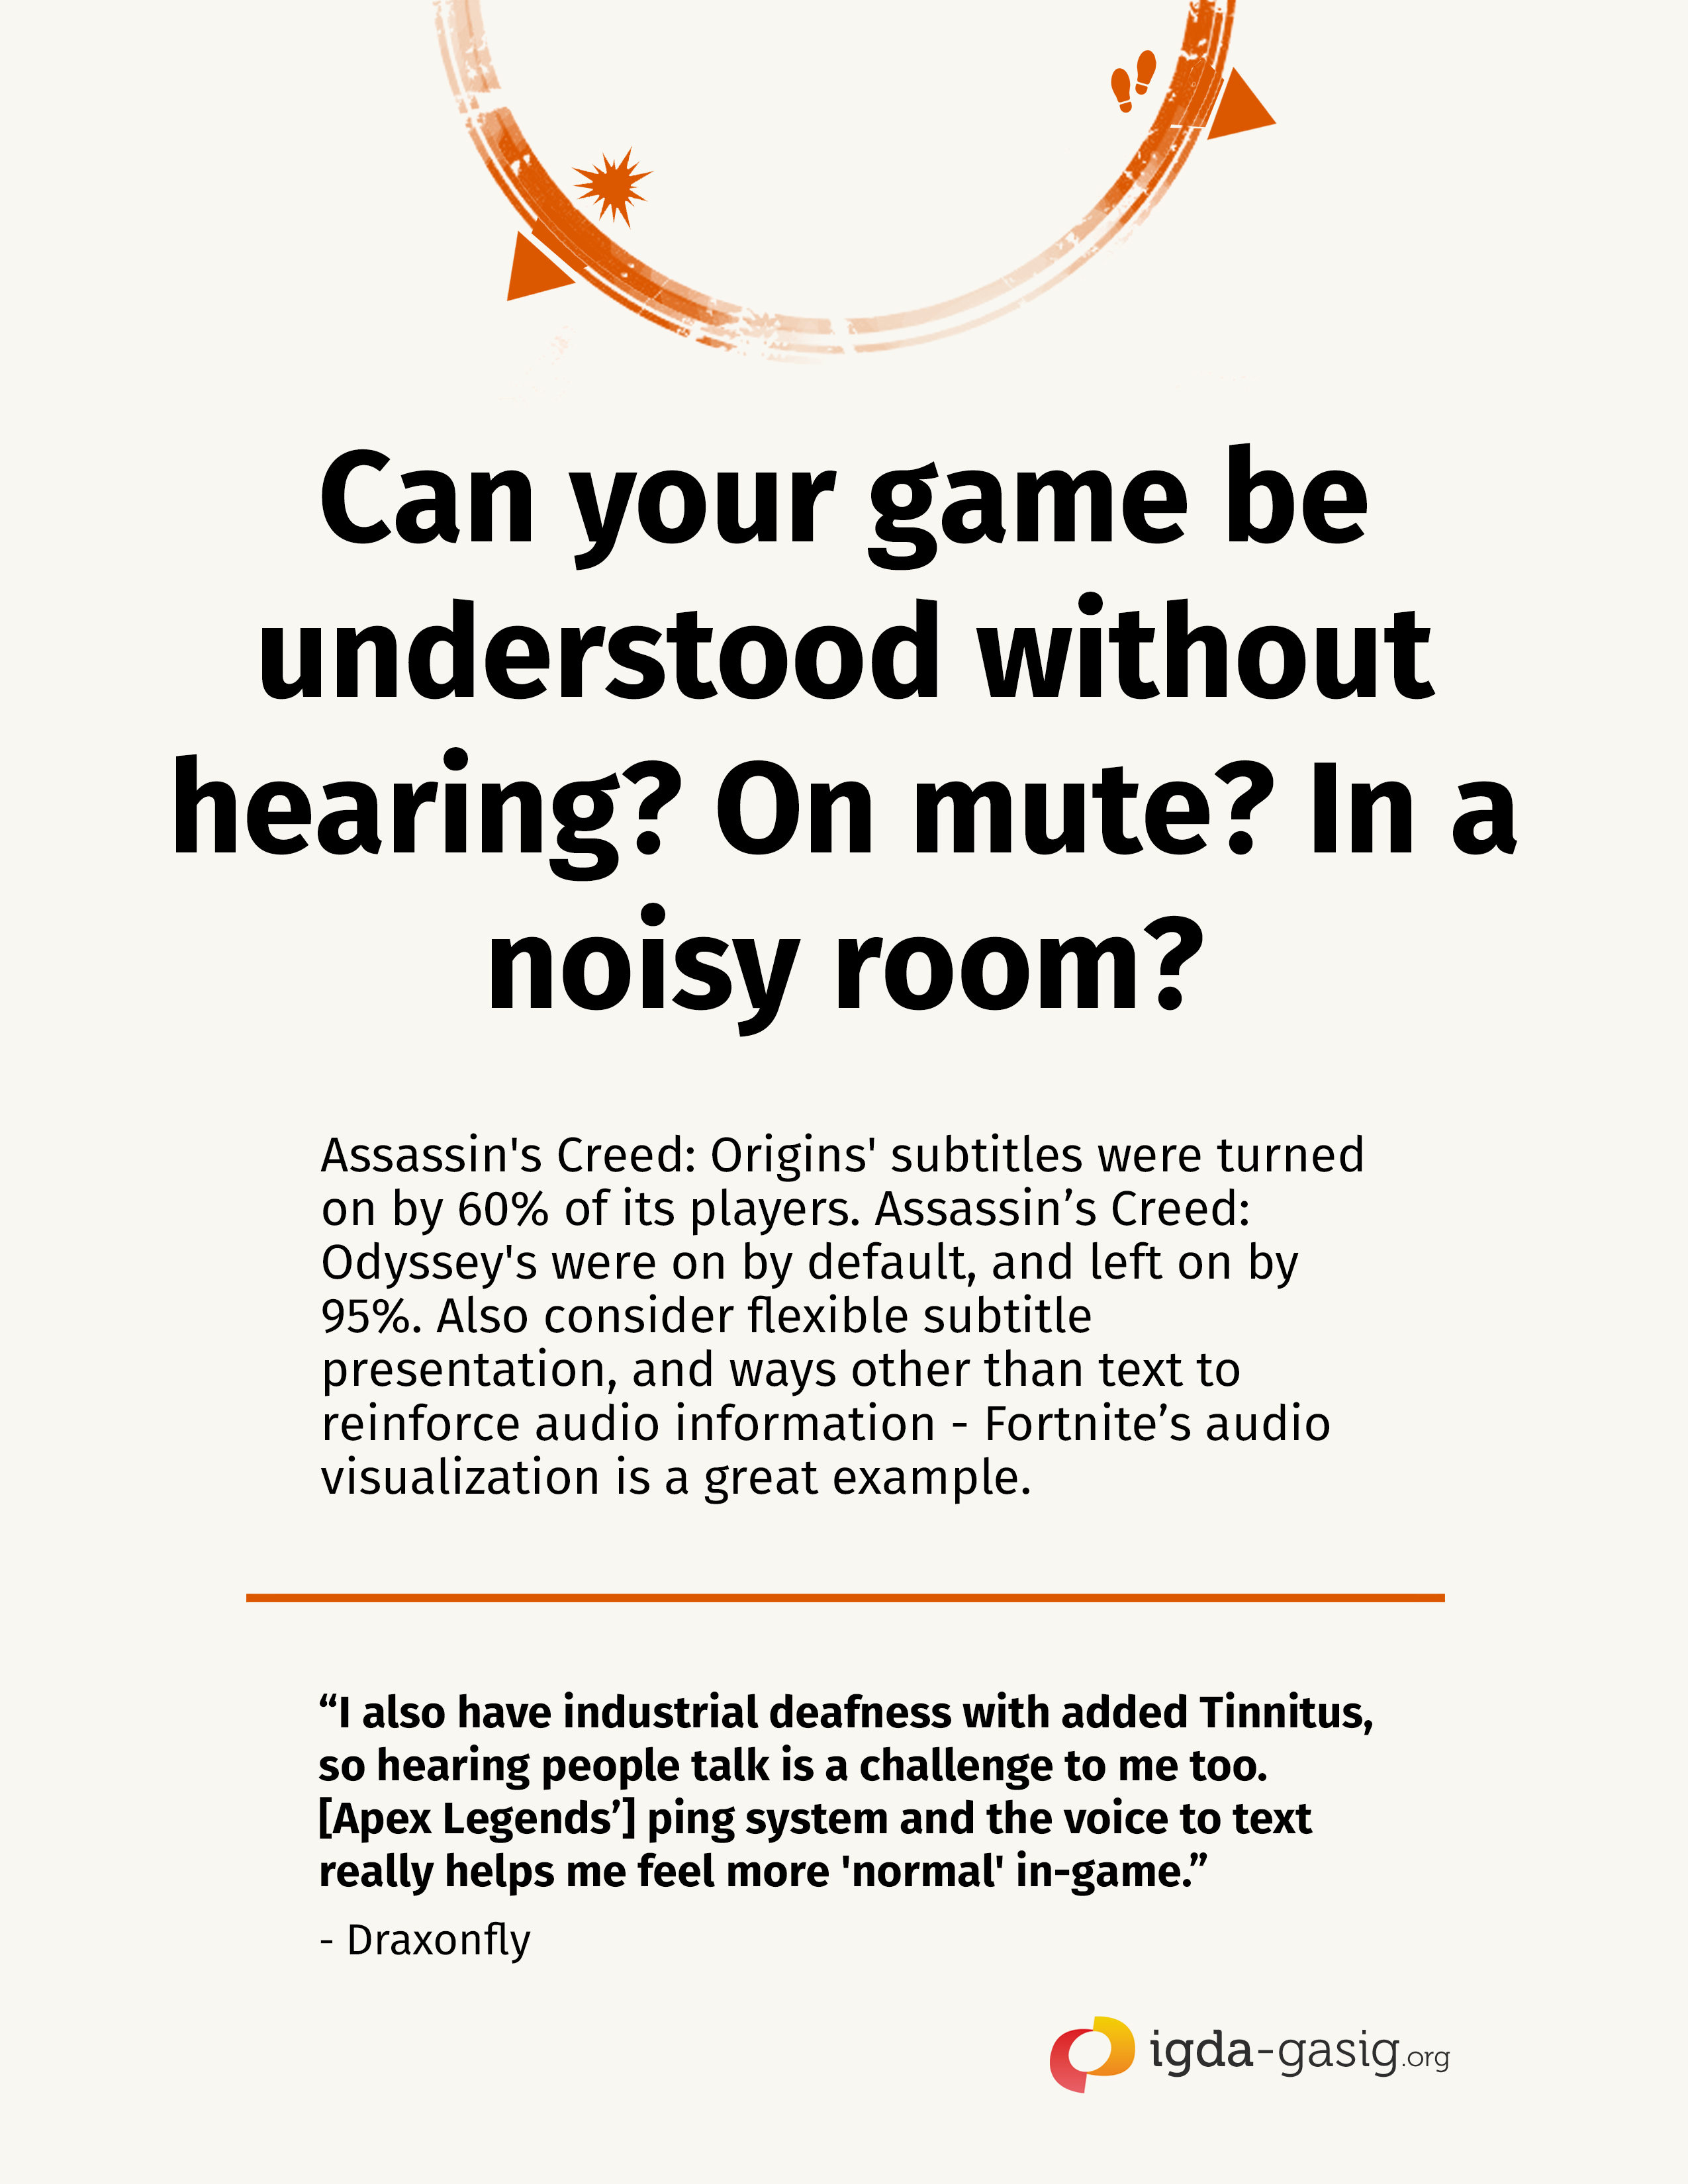 Can your game be understood without hearing? On mute? In a noisy room? (see bottom of page for full text)